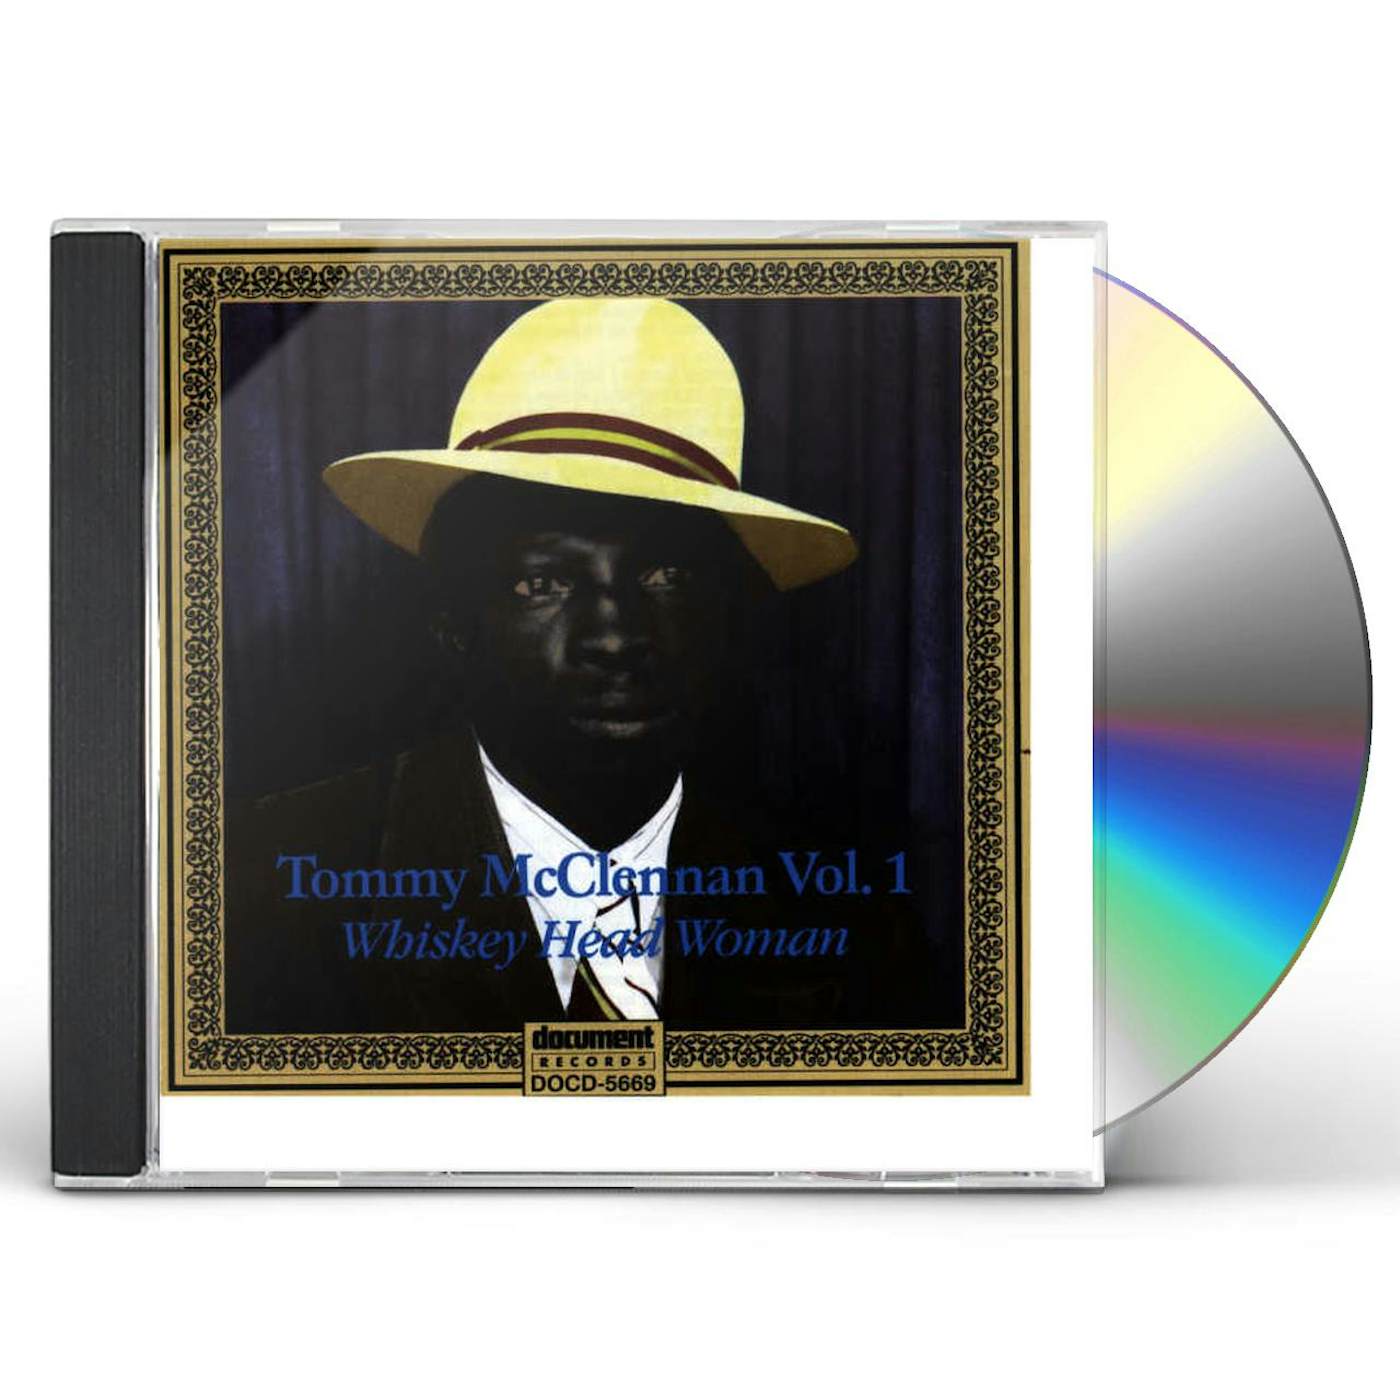 Tommy McClennan COMPLETE RECORDED WORKS VOL. 1: WHISKEY HEAD WOMAN CD